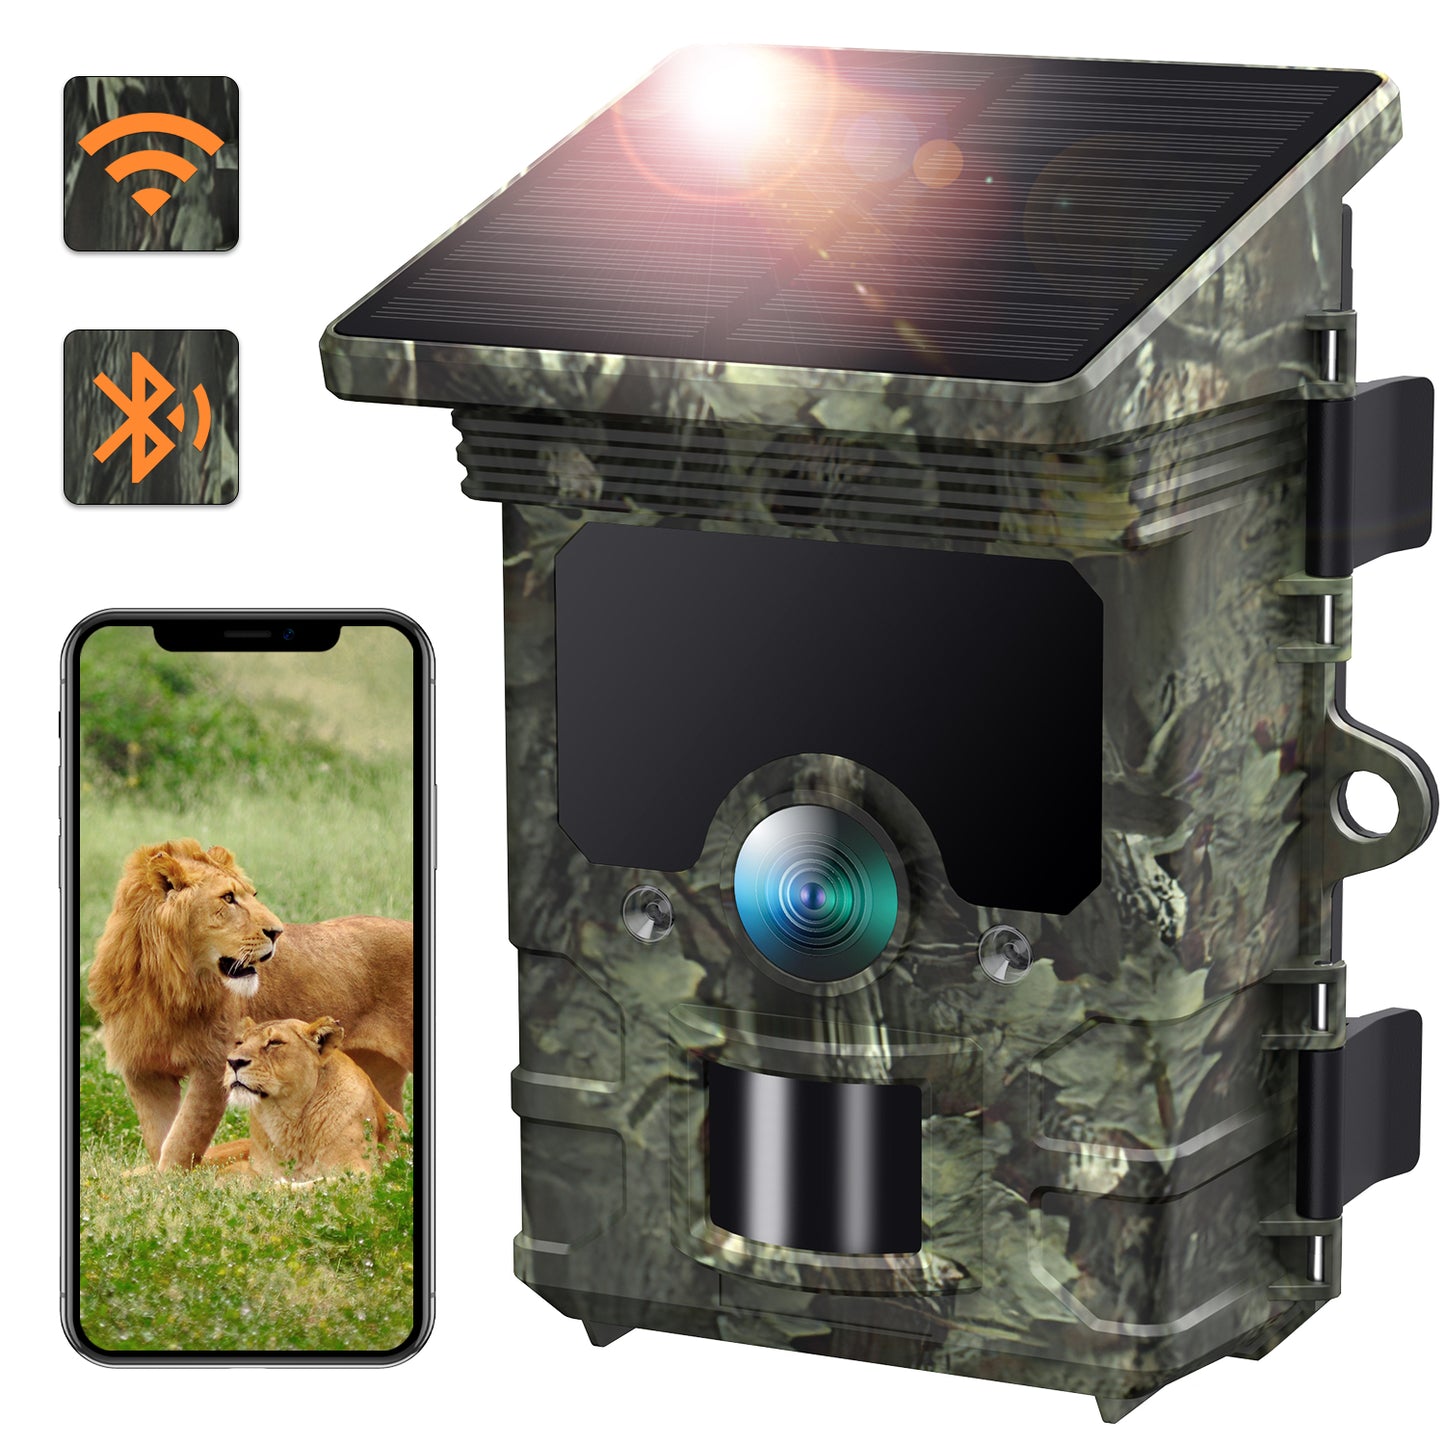 CAMPARK Solar Powered Trail Camera 46MP 4K 30fps WiFi Bluetooth Deer Game Camera with Loop Recording 0.1s Trigger Night Vision Waterproof IP66 Hunting Trail Cam for Wildlife Trace